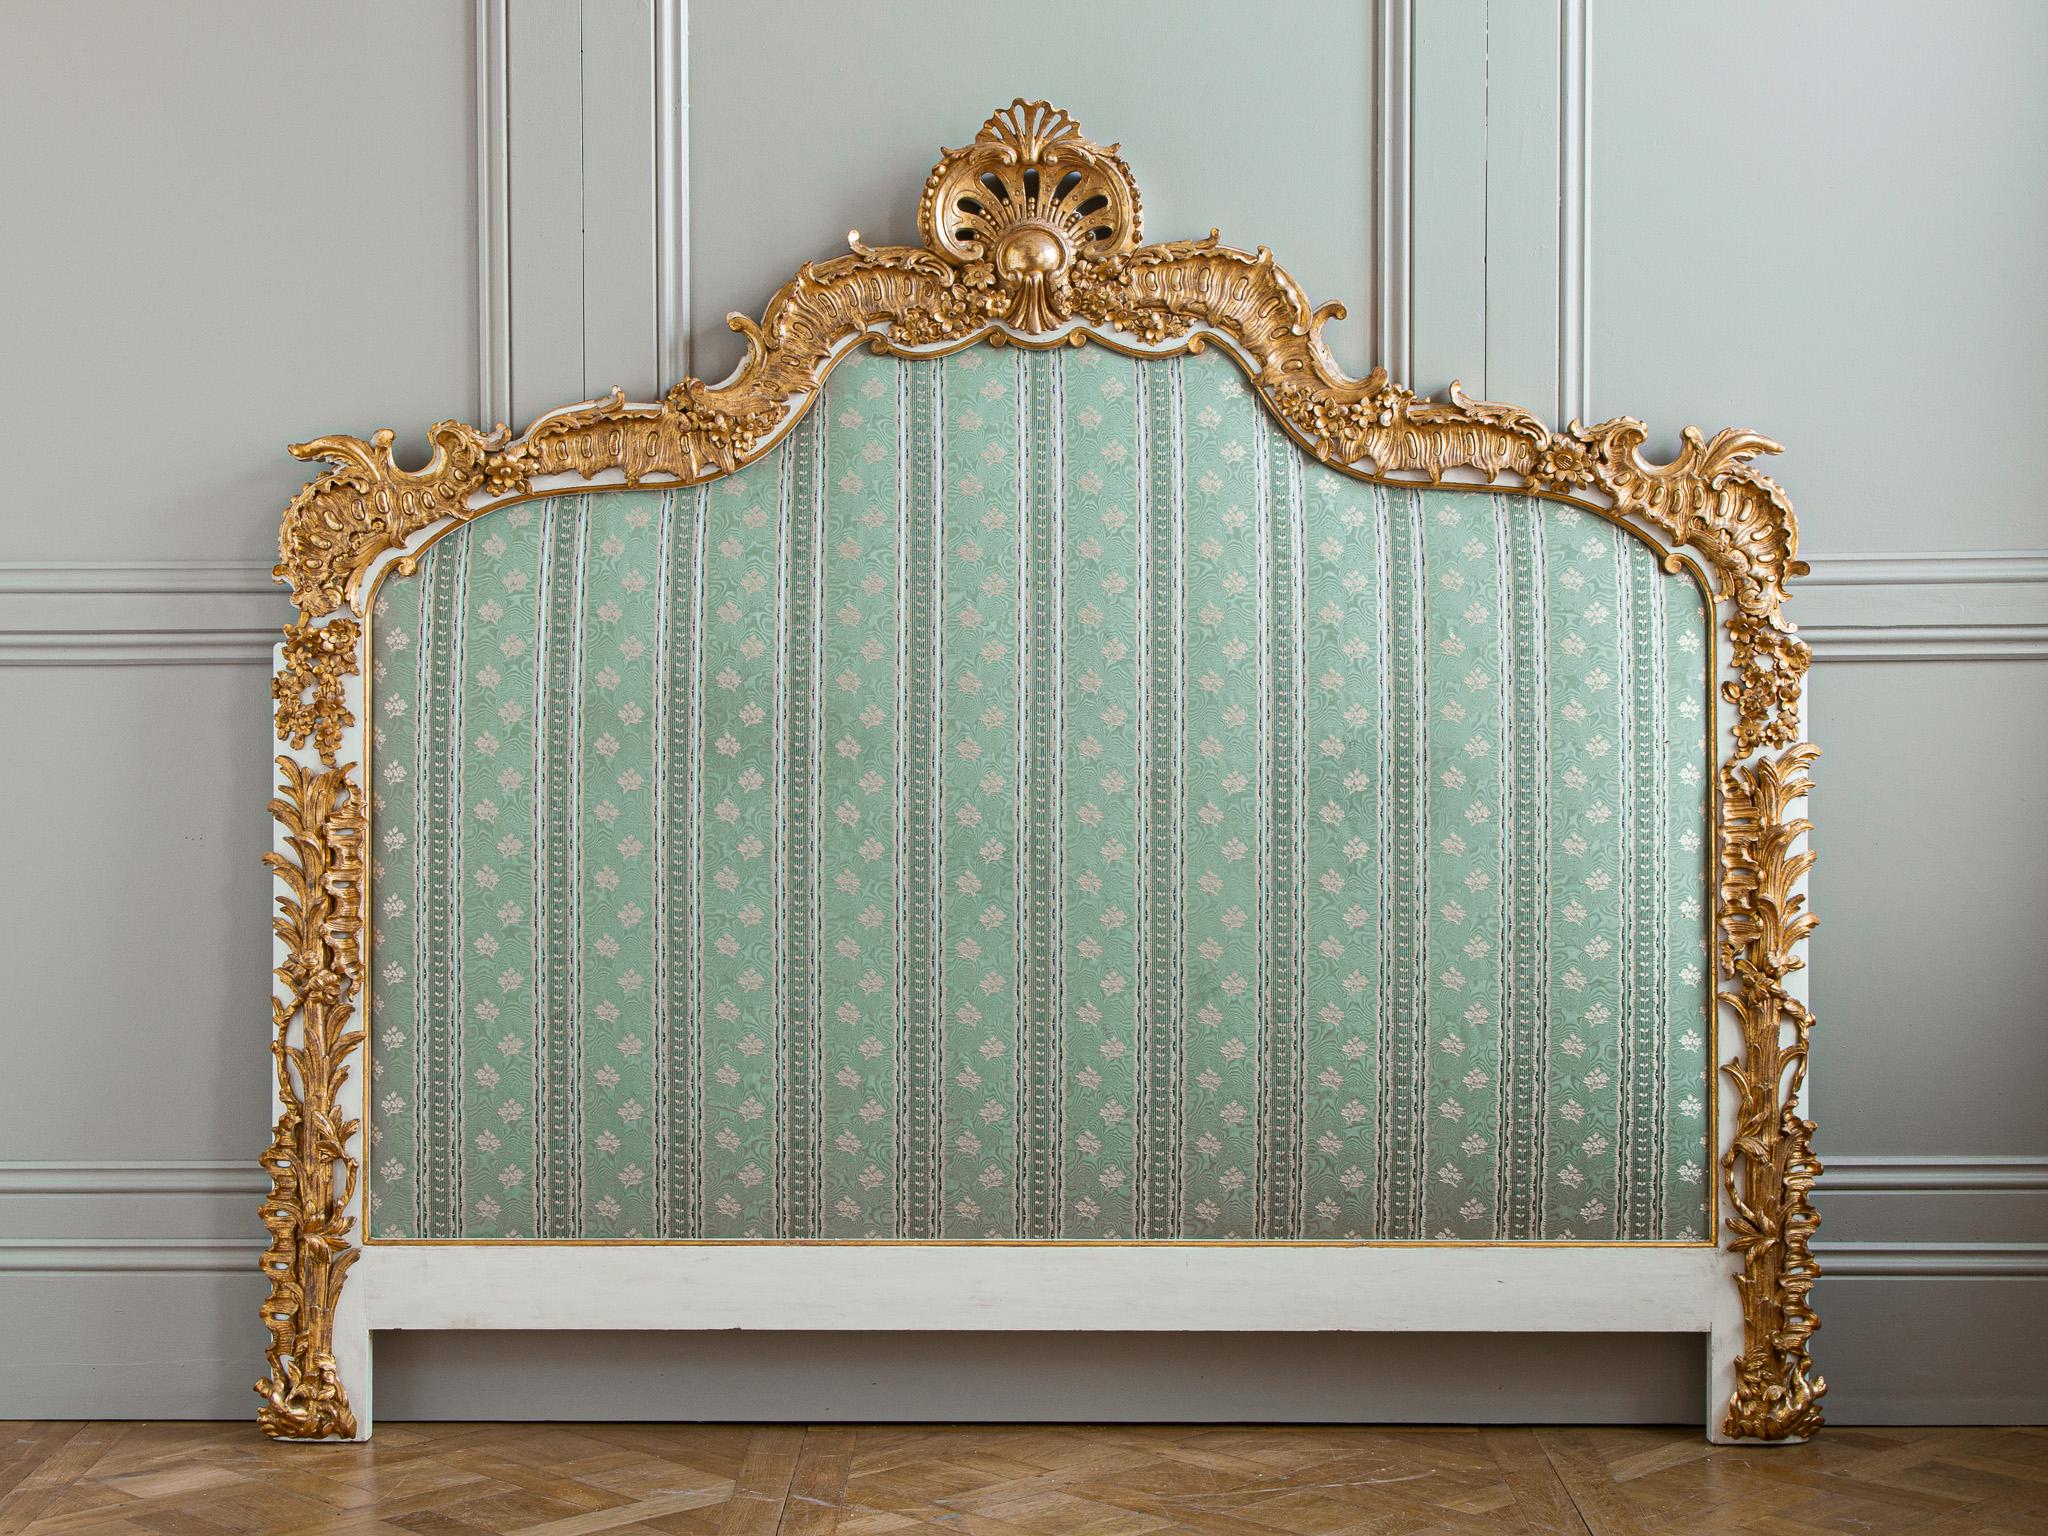 A large headboard from France, circa first half of 20th century with wonderfully ebullient carving in the Louis XV style featuring stylised acanthus leaves and small, detail-carved flowers, with an Art Deco styled rocaille shell at the apex. 
The